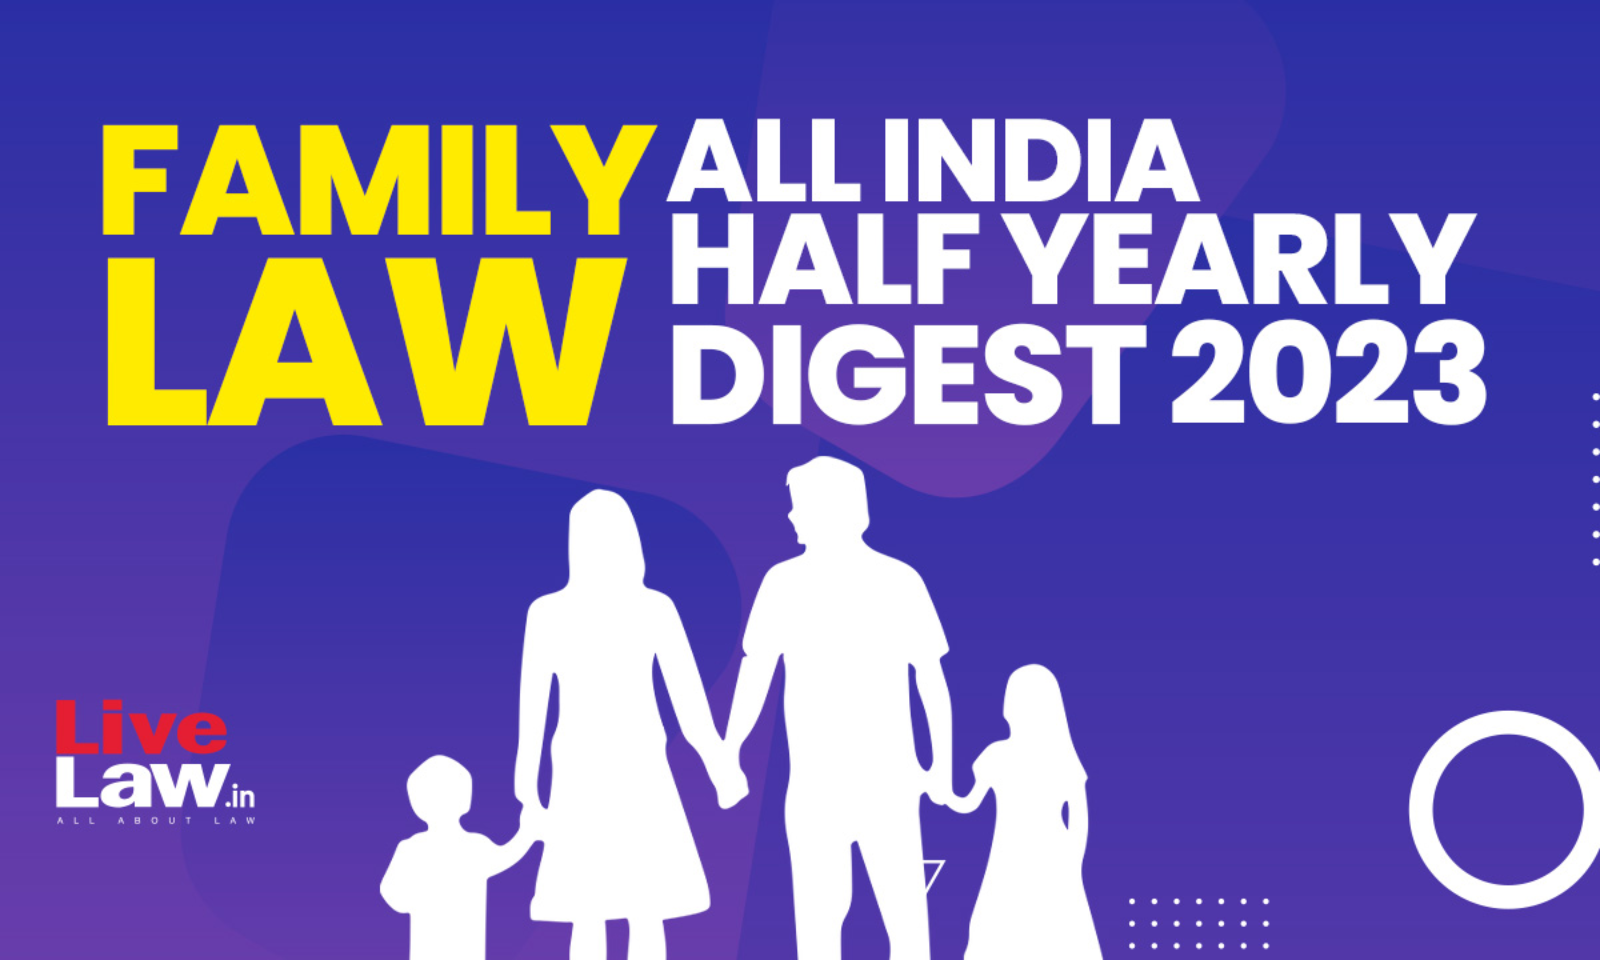 Family Law: All India Half Yearly Digest 2023